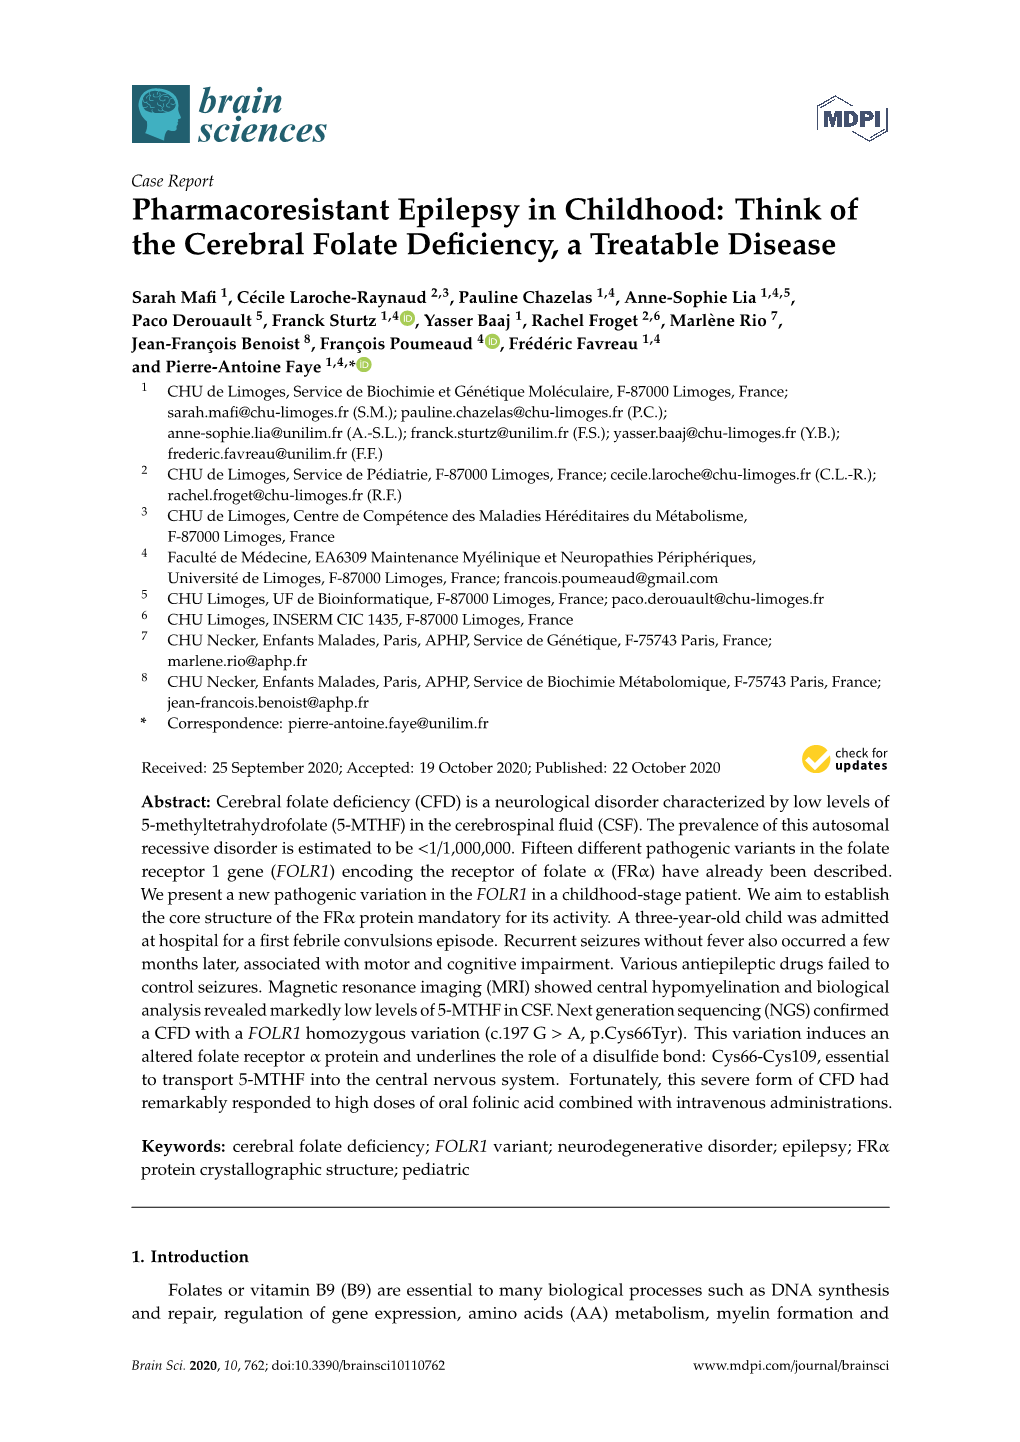 Think of the Cerebral Folate Deficiency, a Treatable Disease